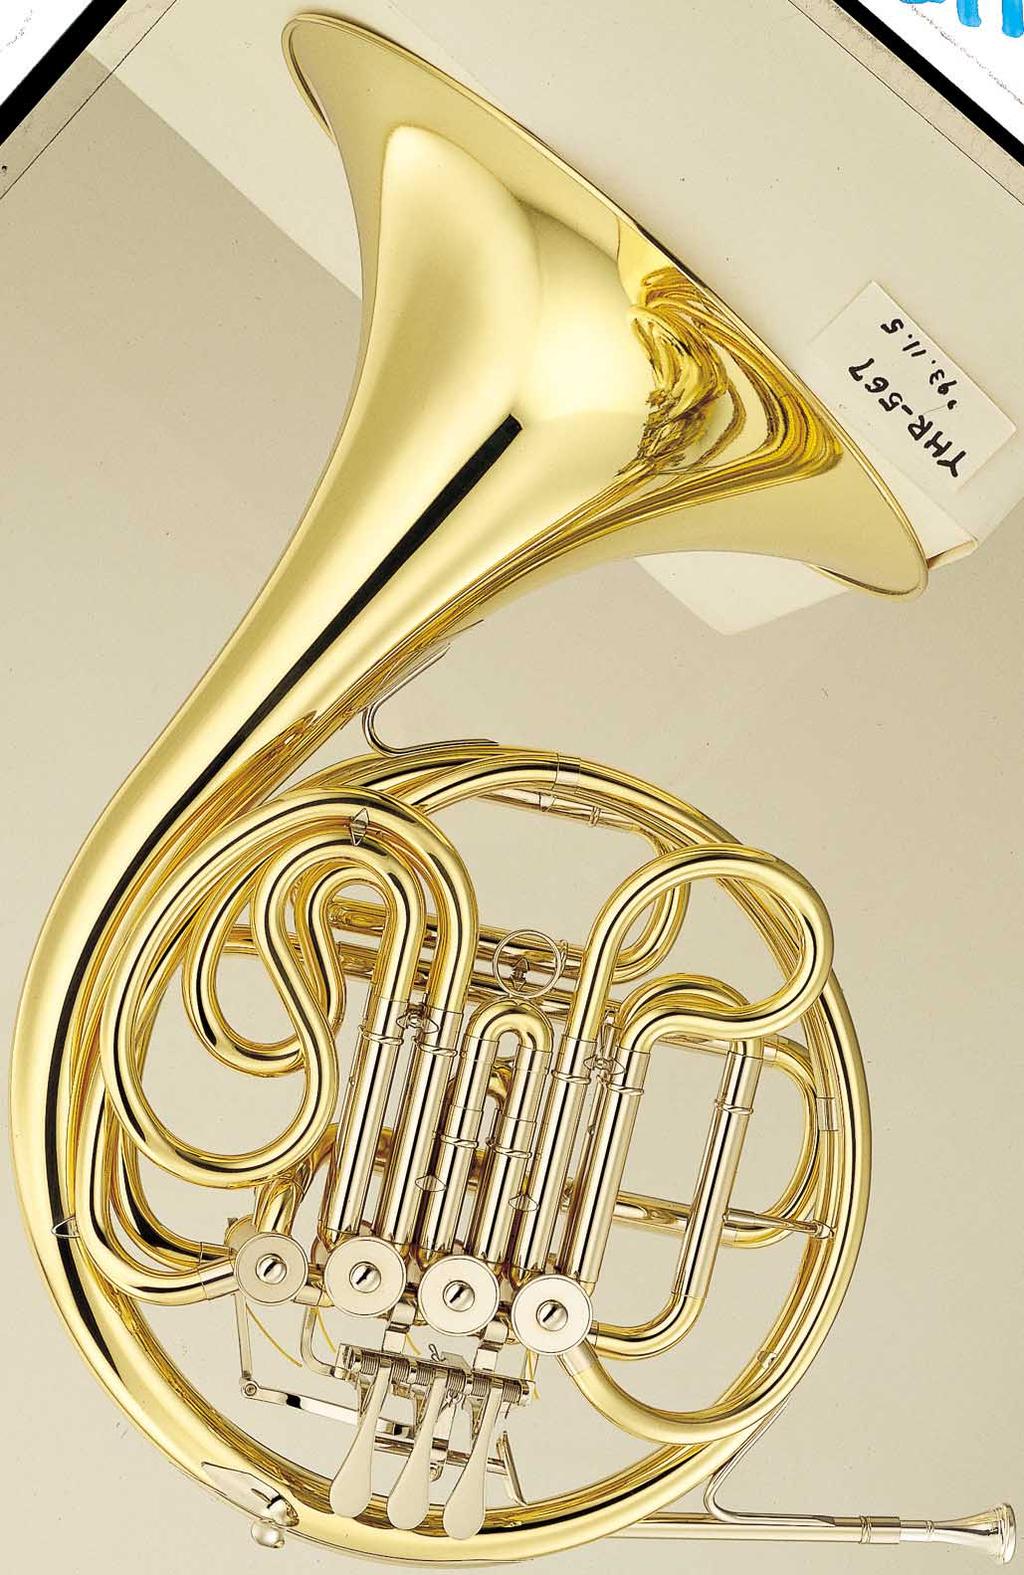 Full Double Horn YHR-667 The warm yet clear sound of the 667 permits great tone color